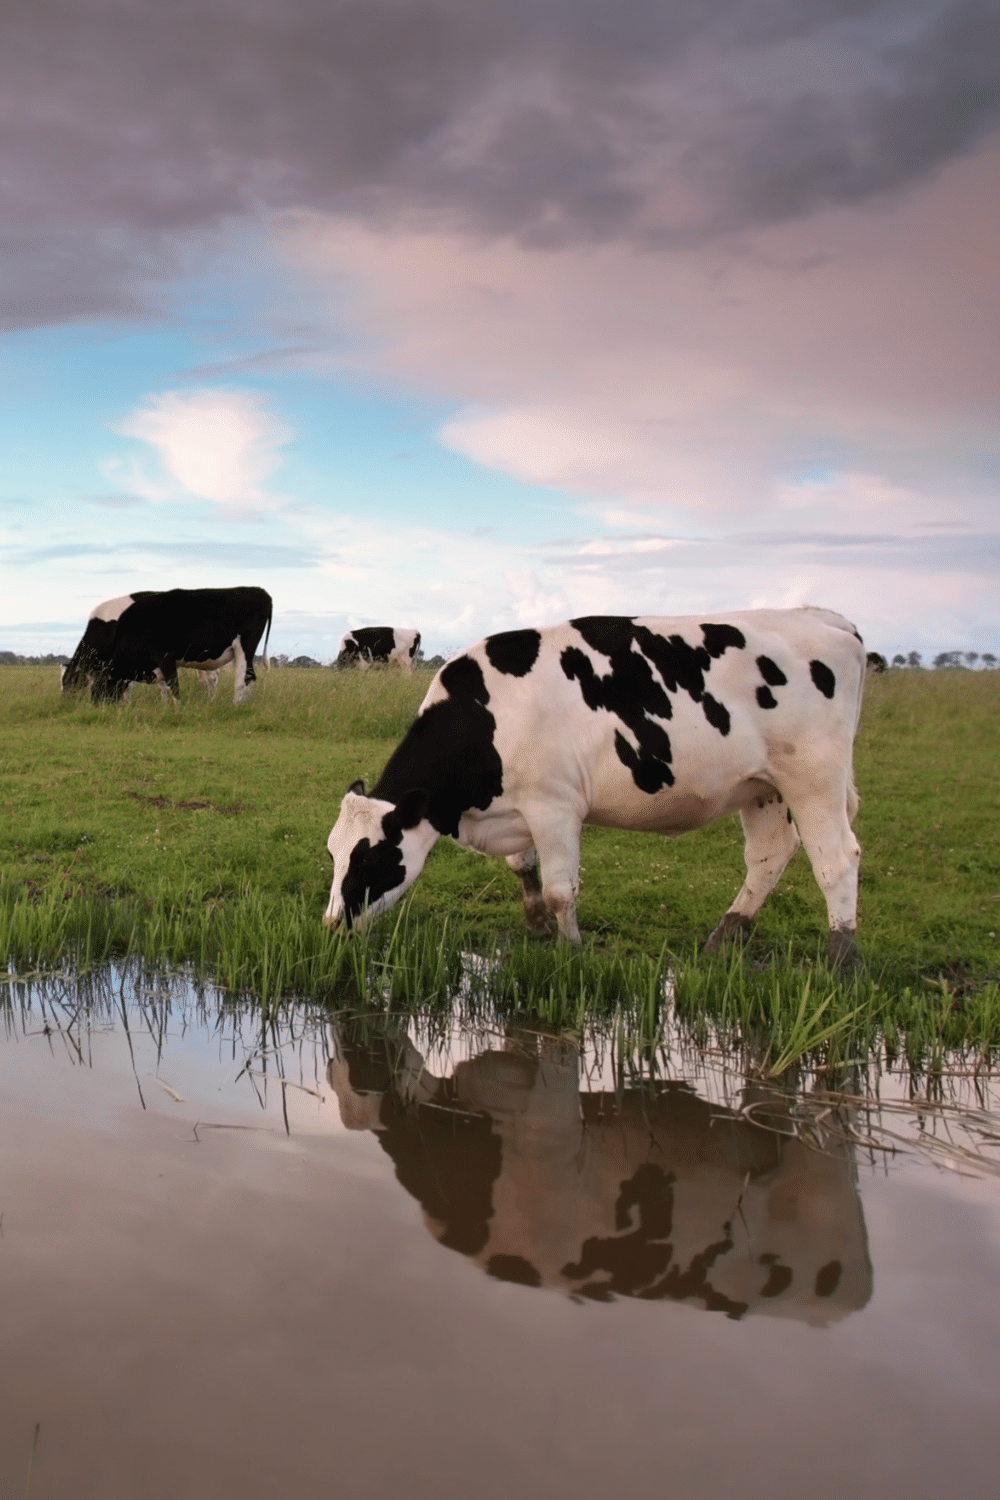 Cows Do Not Handle Water Well